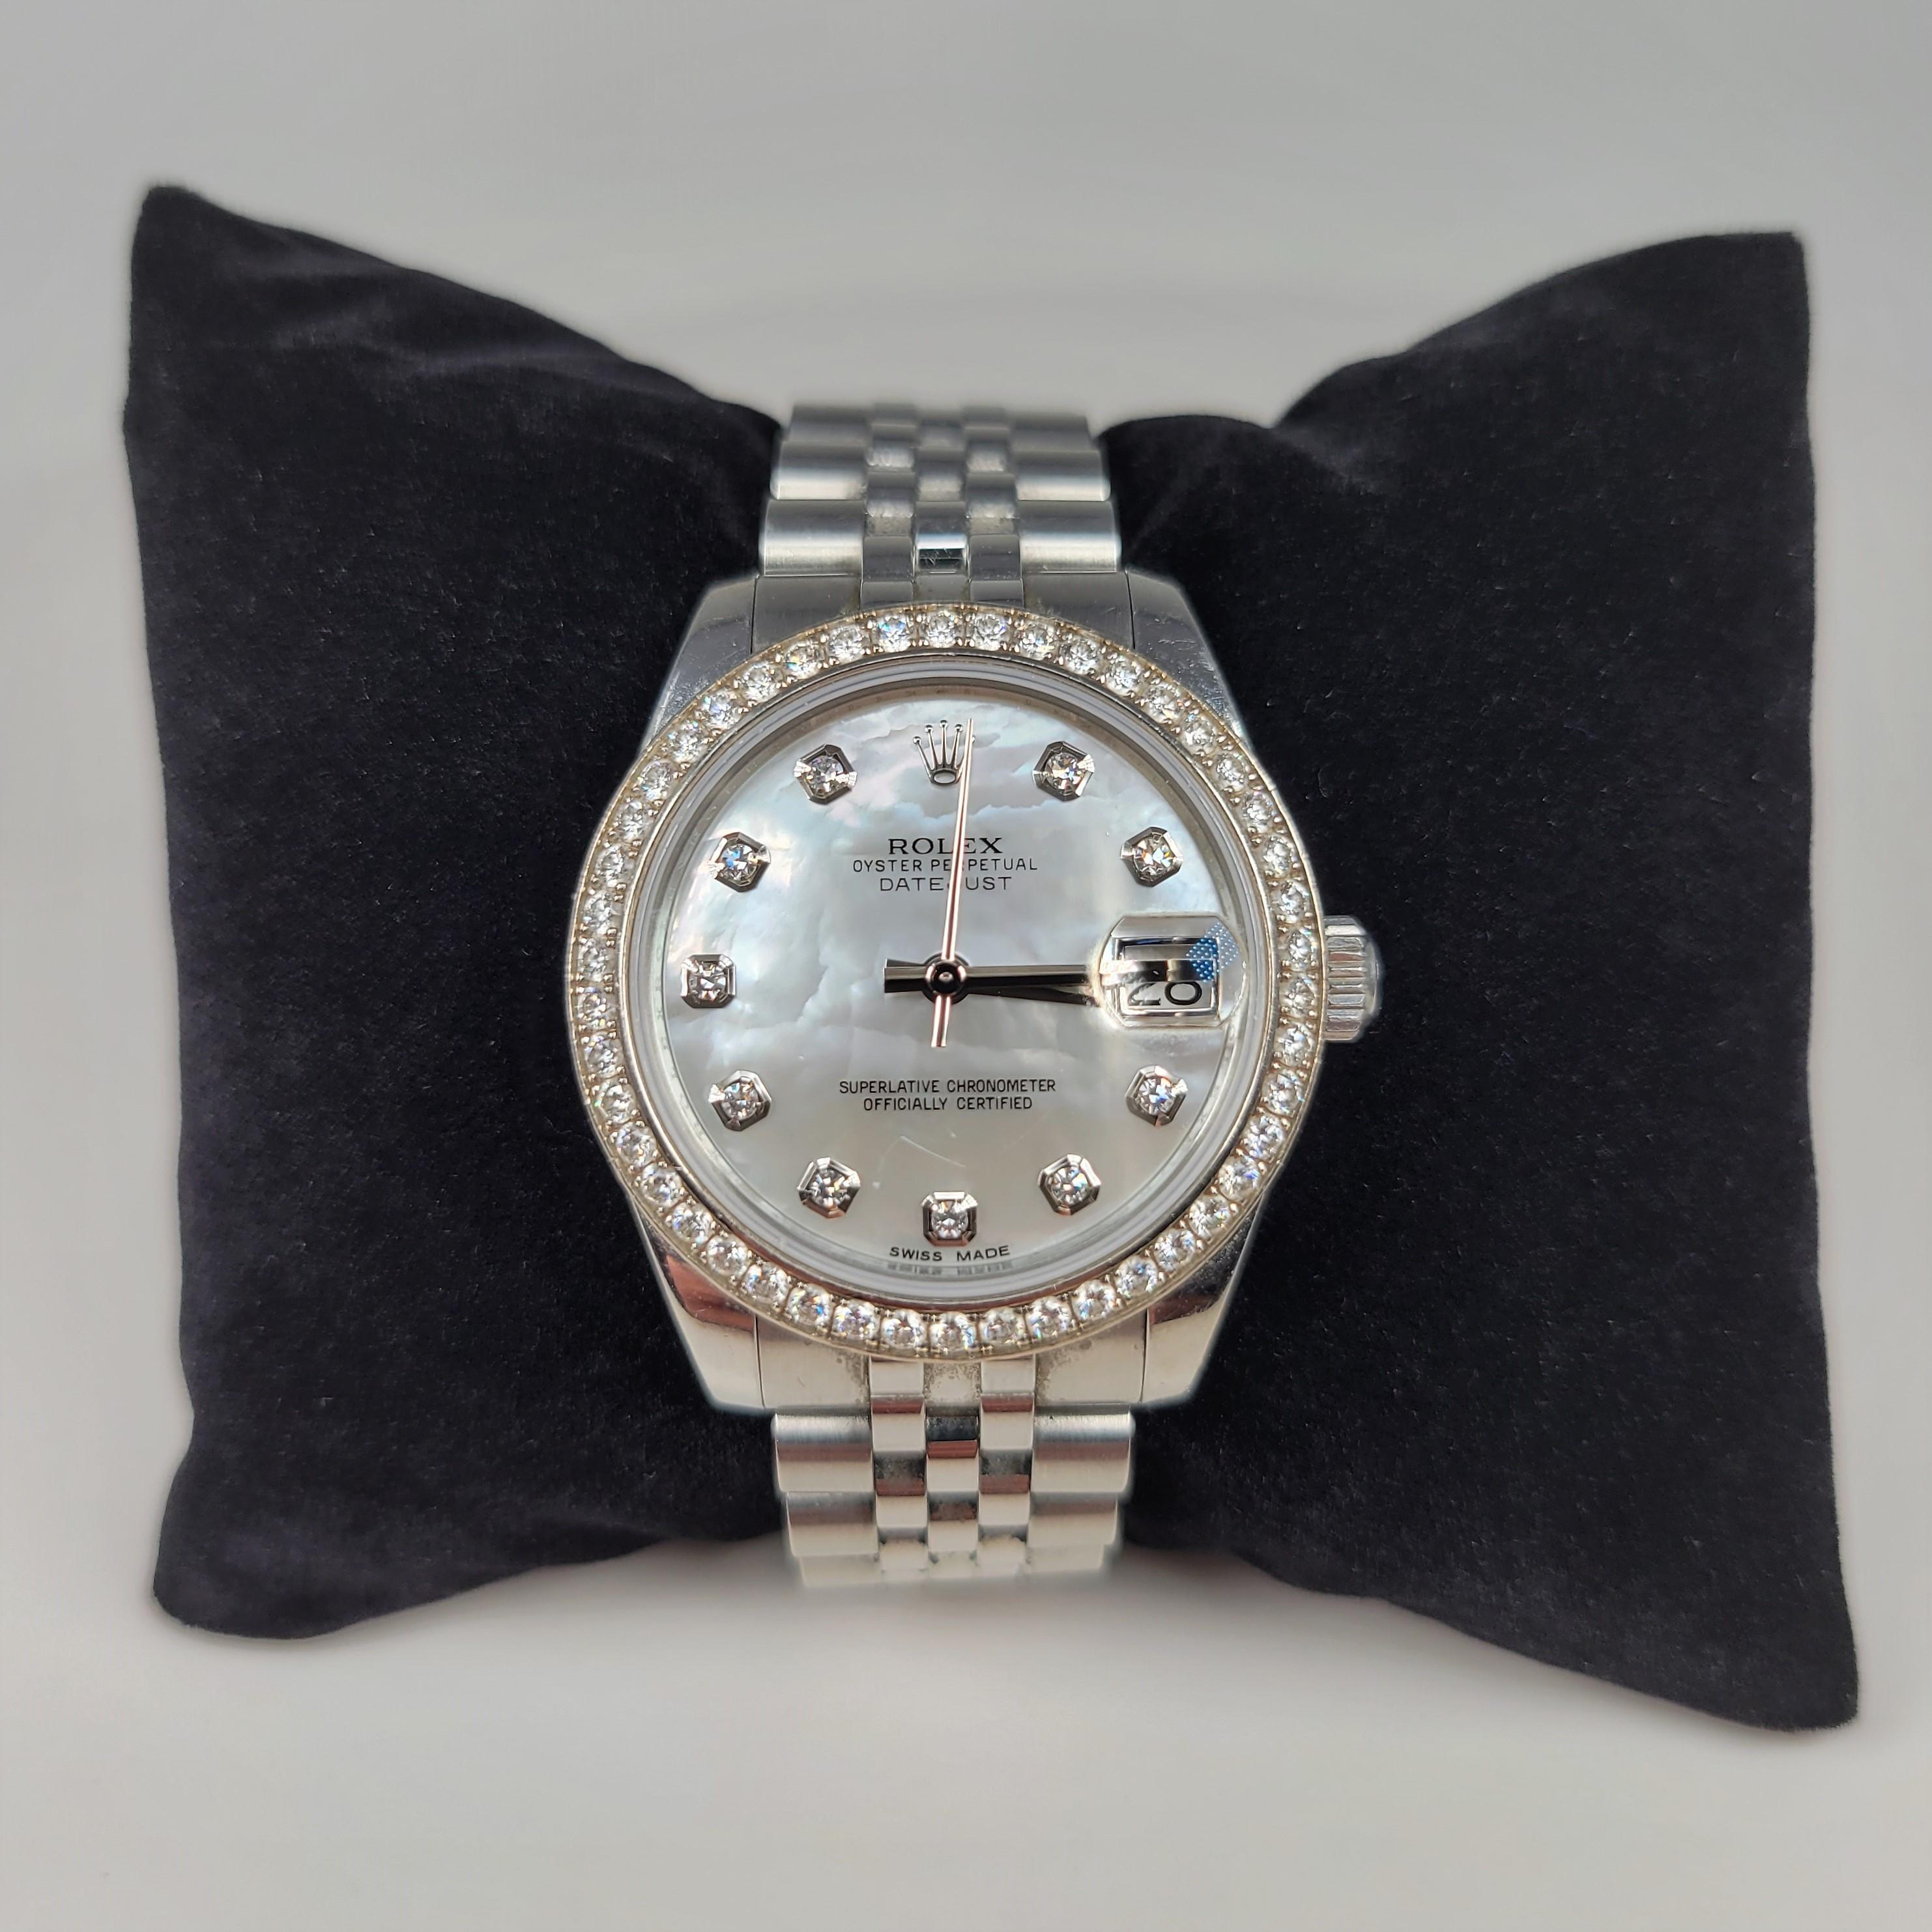 This wrist watch is composed of a stainless steel “Jubilee” bracelet, stamped SOZ, attached to a stainless steel and white gold case, stamped 178384, 92L18986 with a mother-of-pearl dial, stamped ROLEX, OYSTER PERPETUAL DATEJUST.  The dial supports